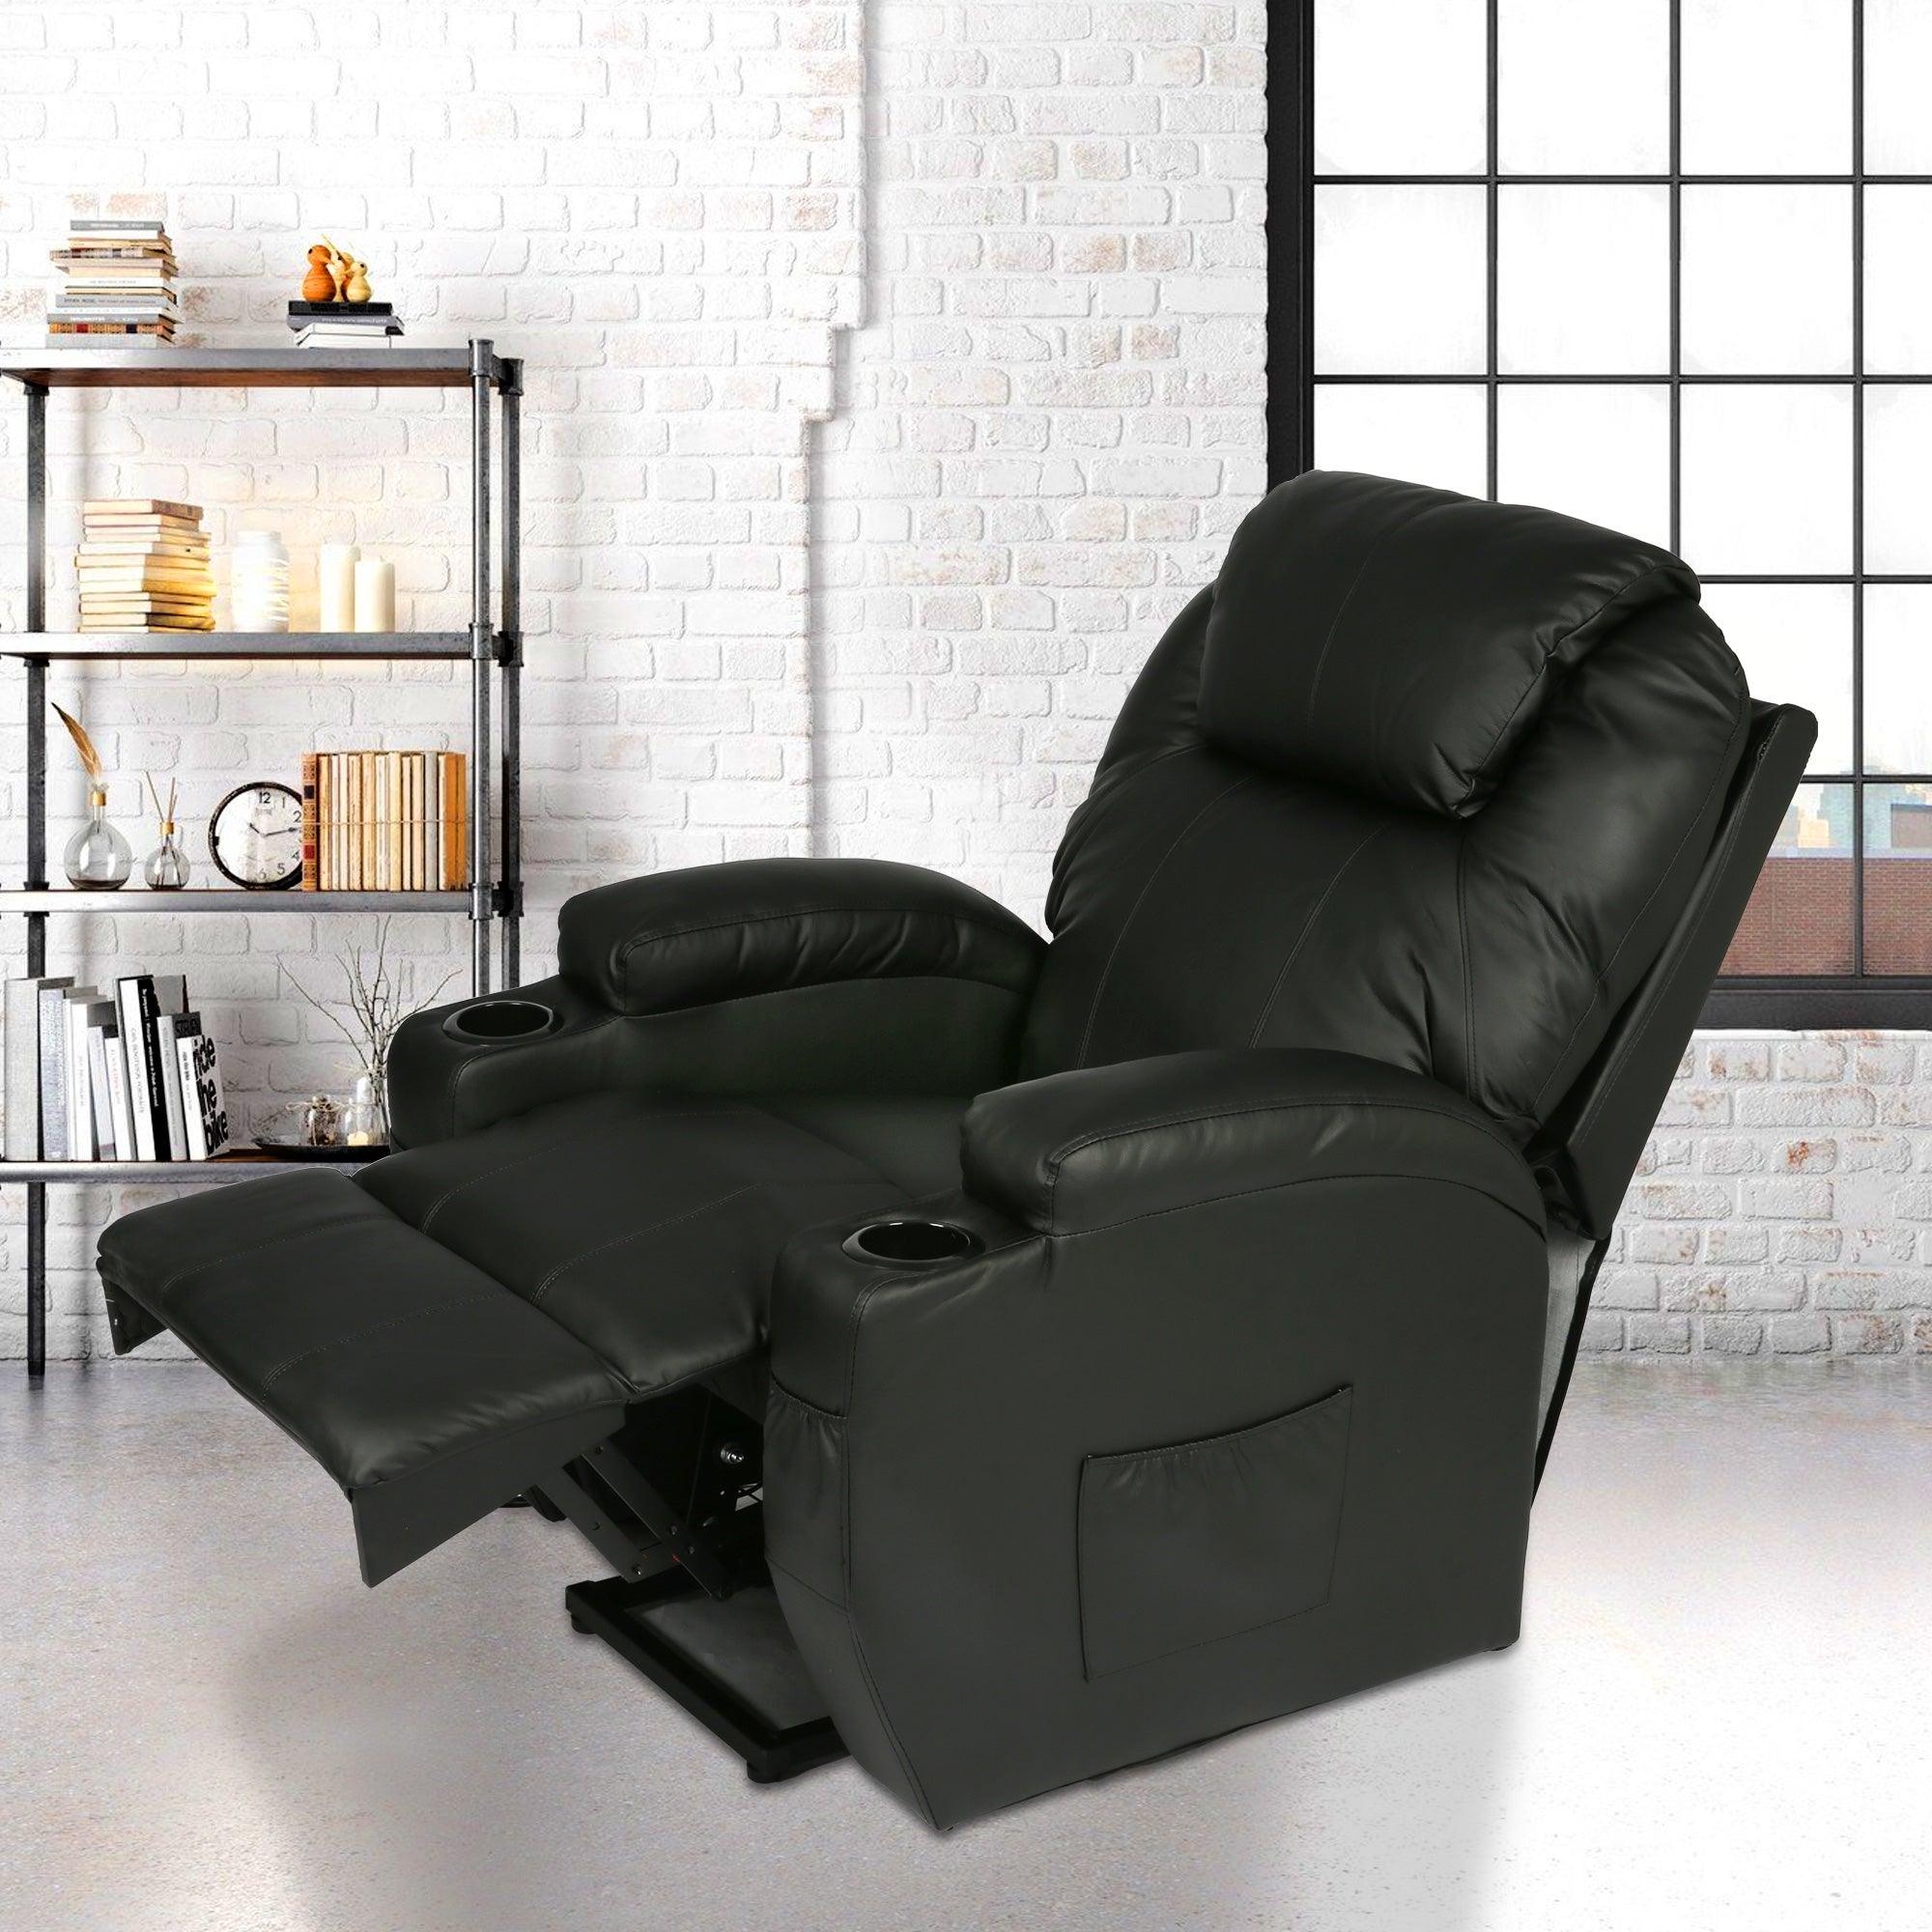 Electric Power Lift Leather Sofa Power Reclining Massage Chair for Elderly with Massage and Heat, Black - Bosonshop